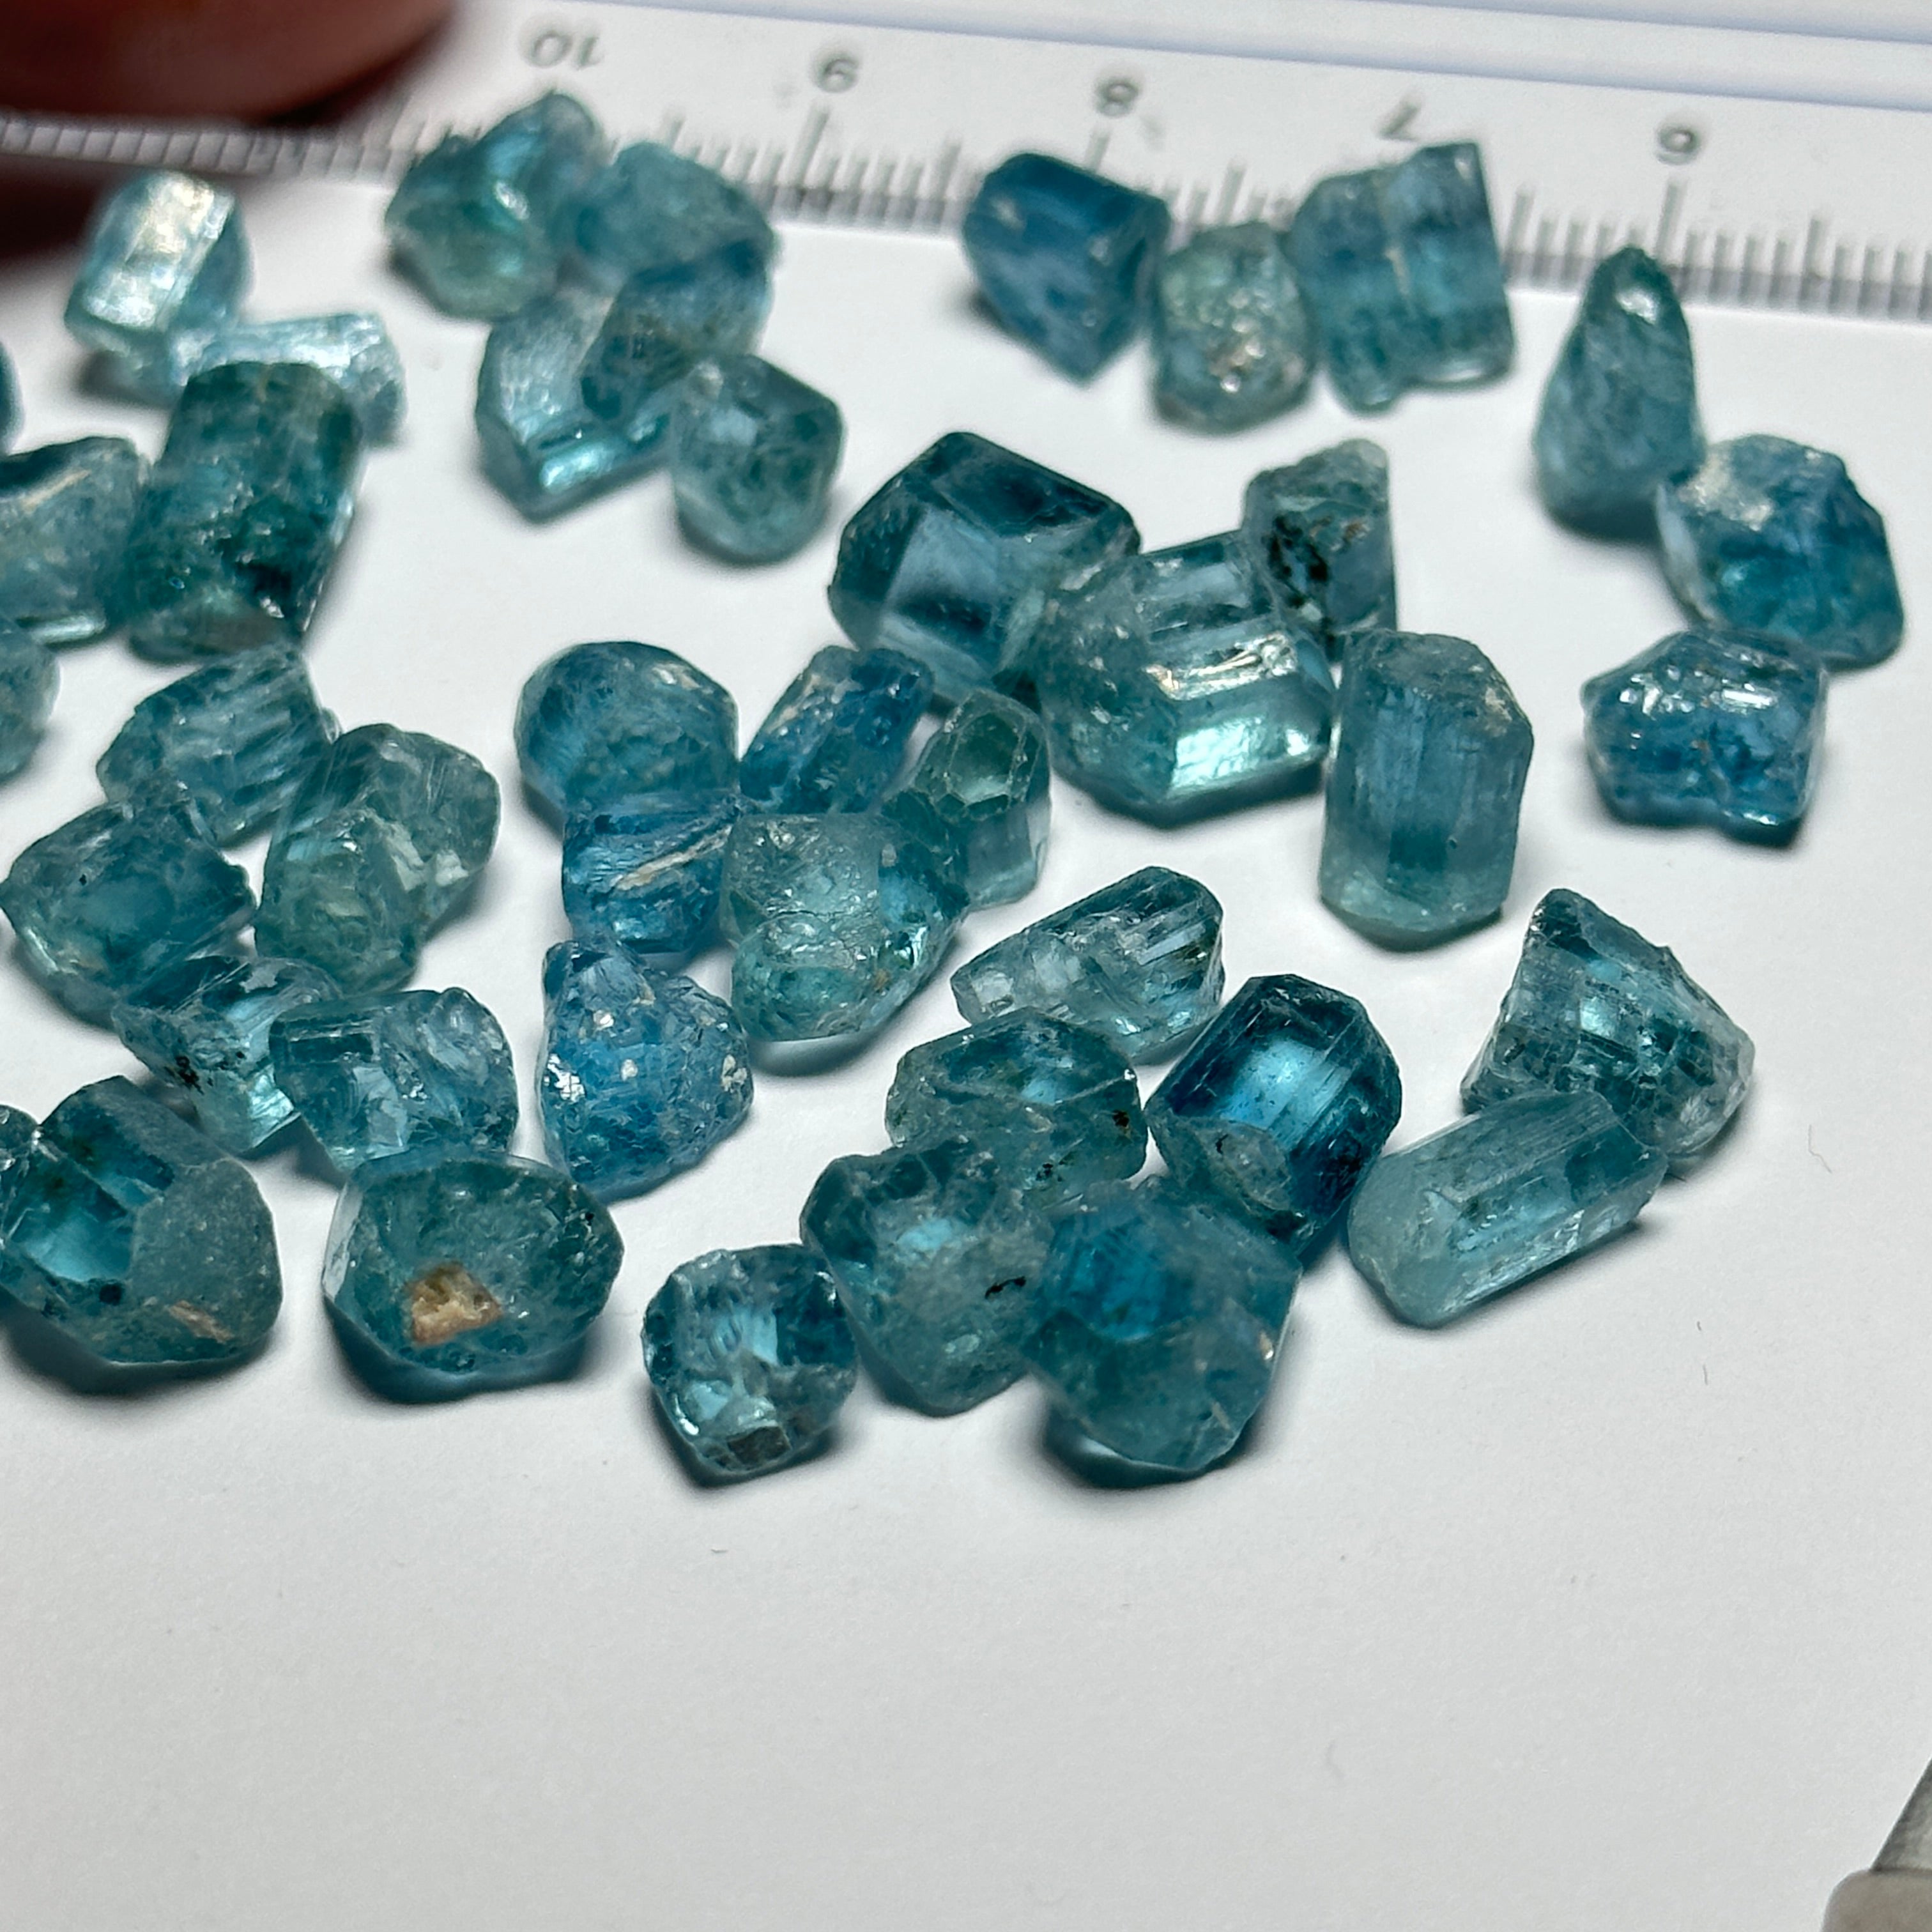 94.15ct Extraordinarily RARE, Blue Apatite Crystals Lot from Merelani, Karo Pit in Block D, Tanzania. Untreated Unheated, 0.86ct - 4.04ct